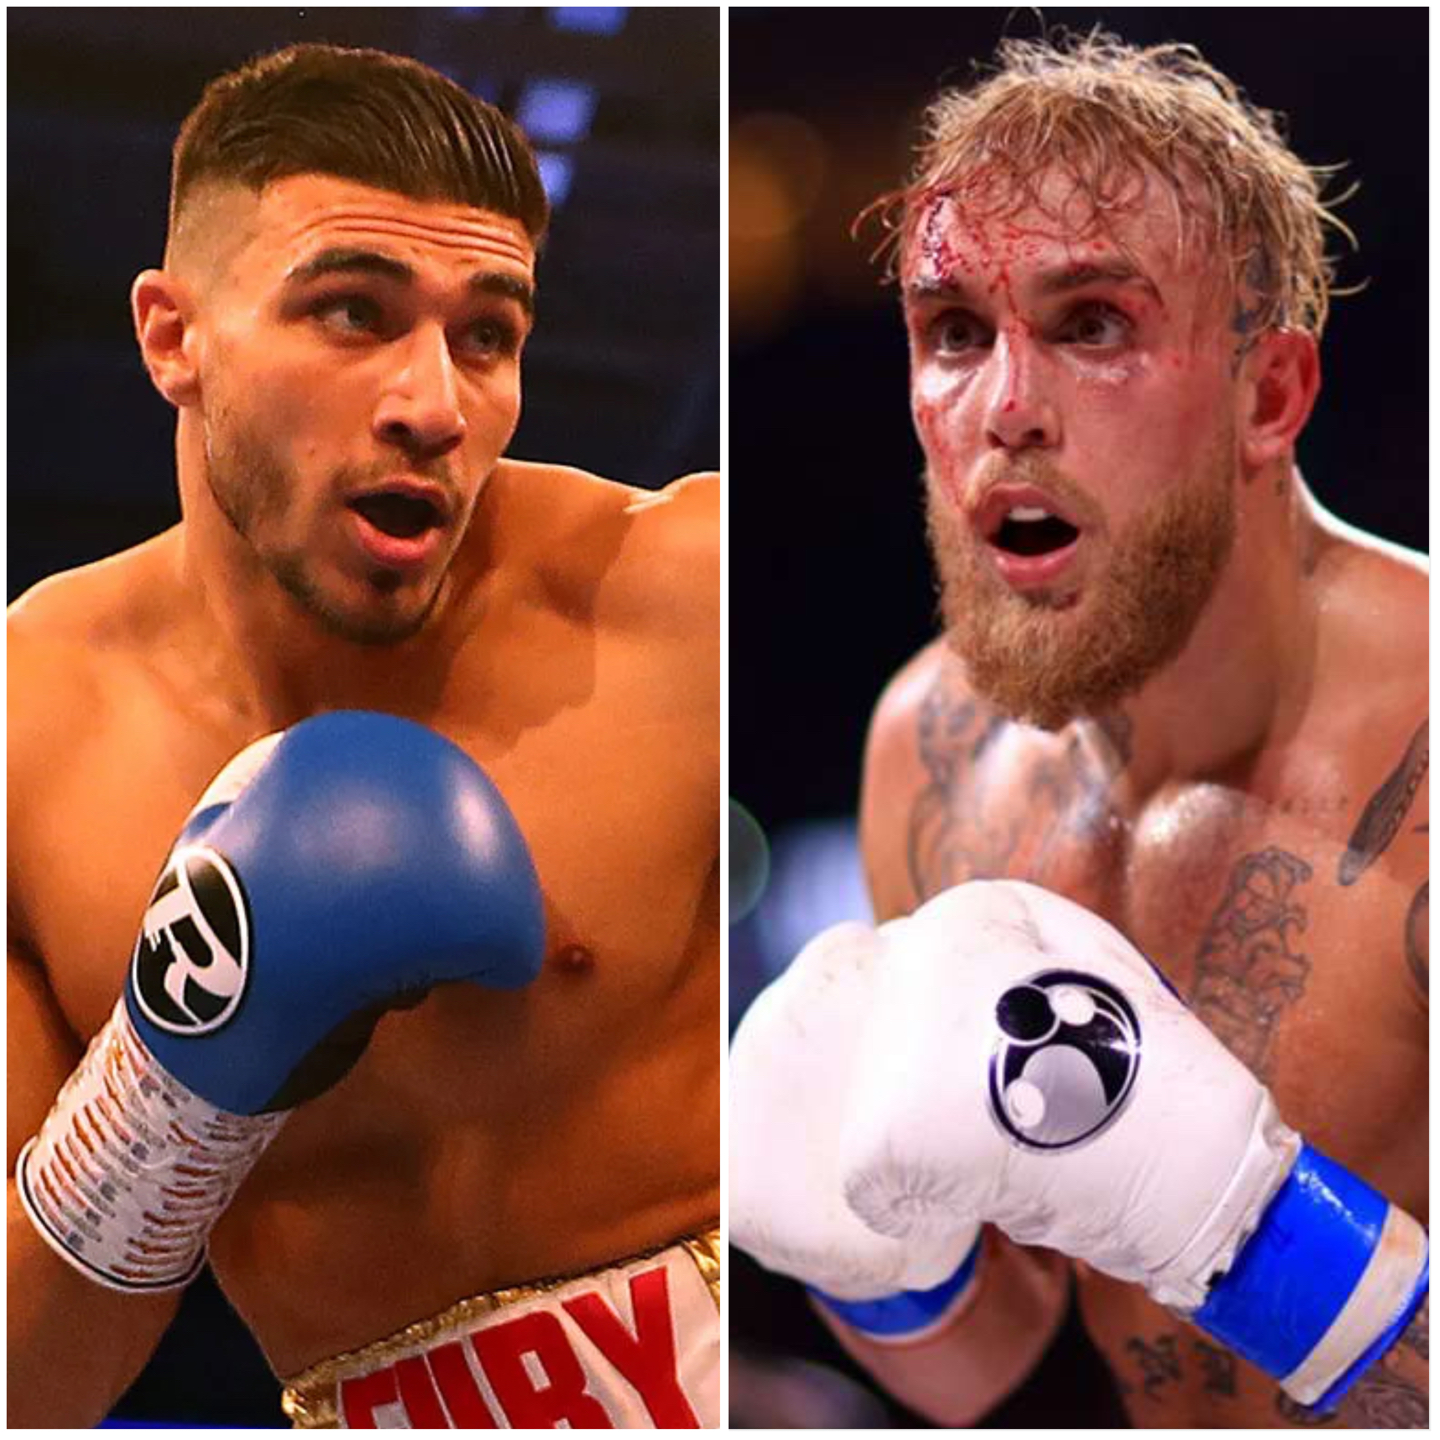 Jake Paul vs. Tommy Fury Finalized For August 6